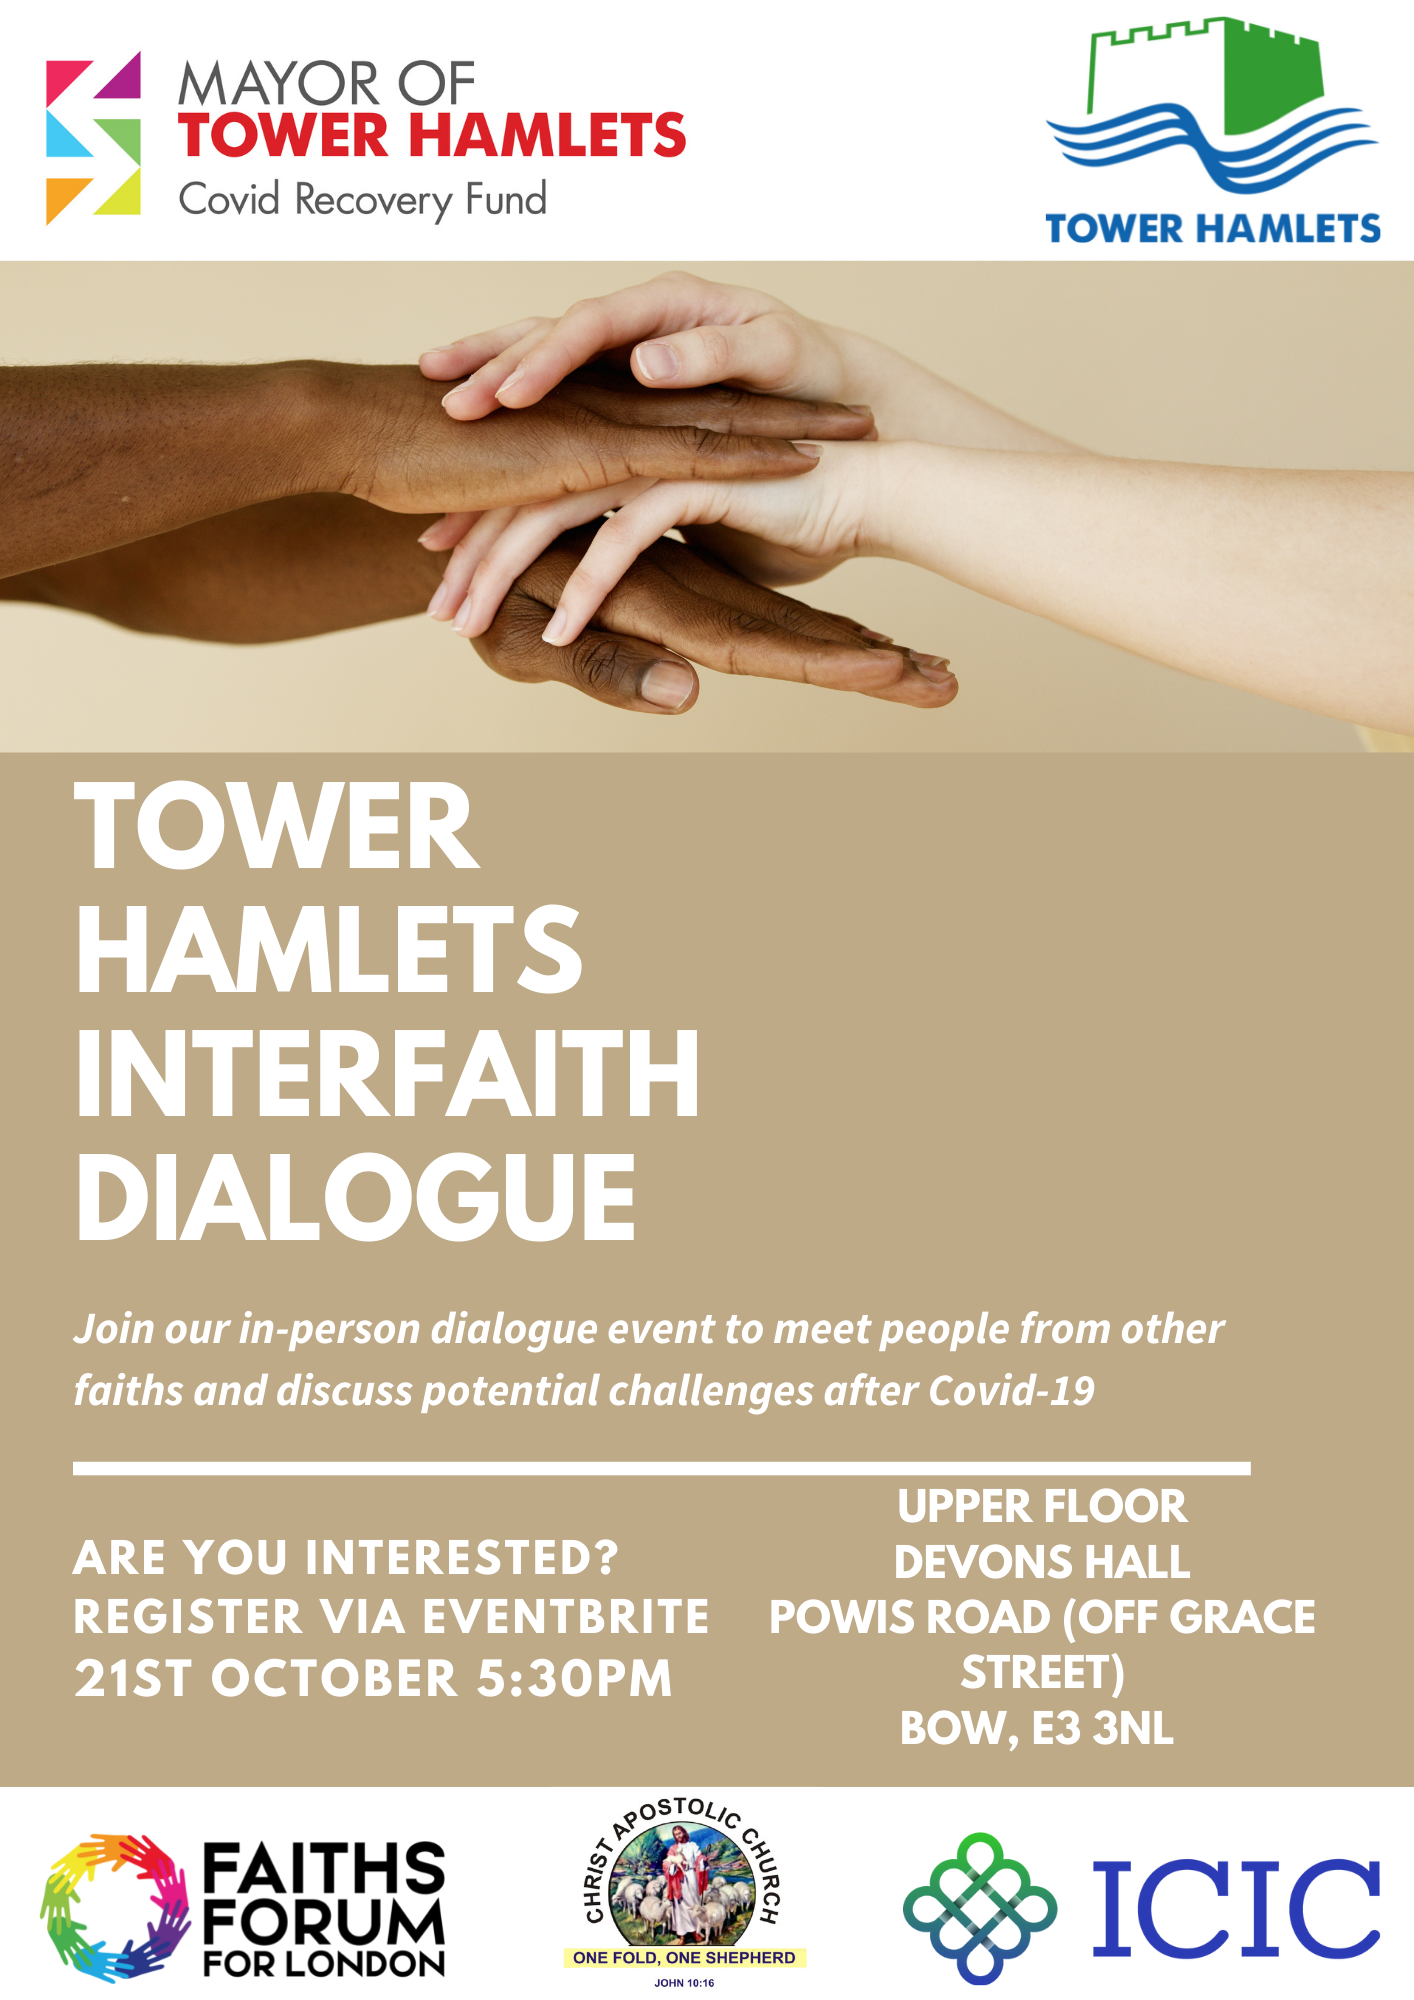 Our first event as part of the Tower Hamlets Council Mayor’s COVID Recovery Cohesion Events Fund